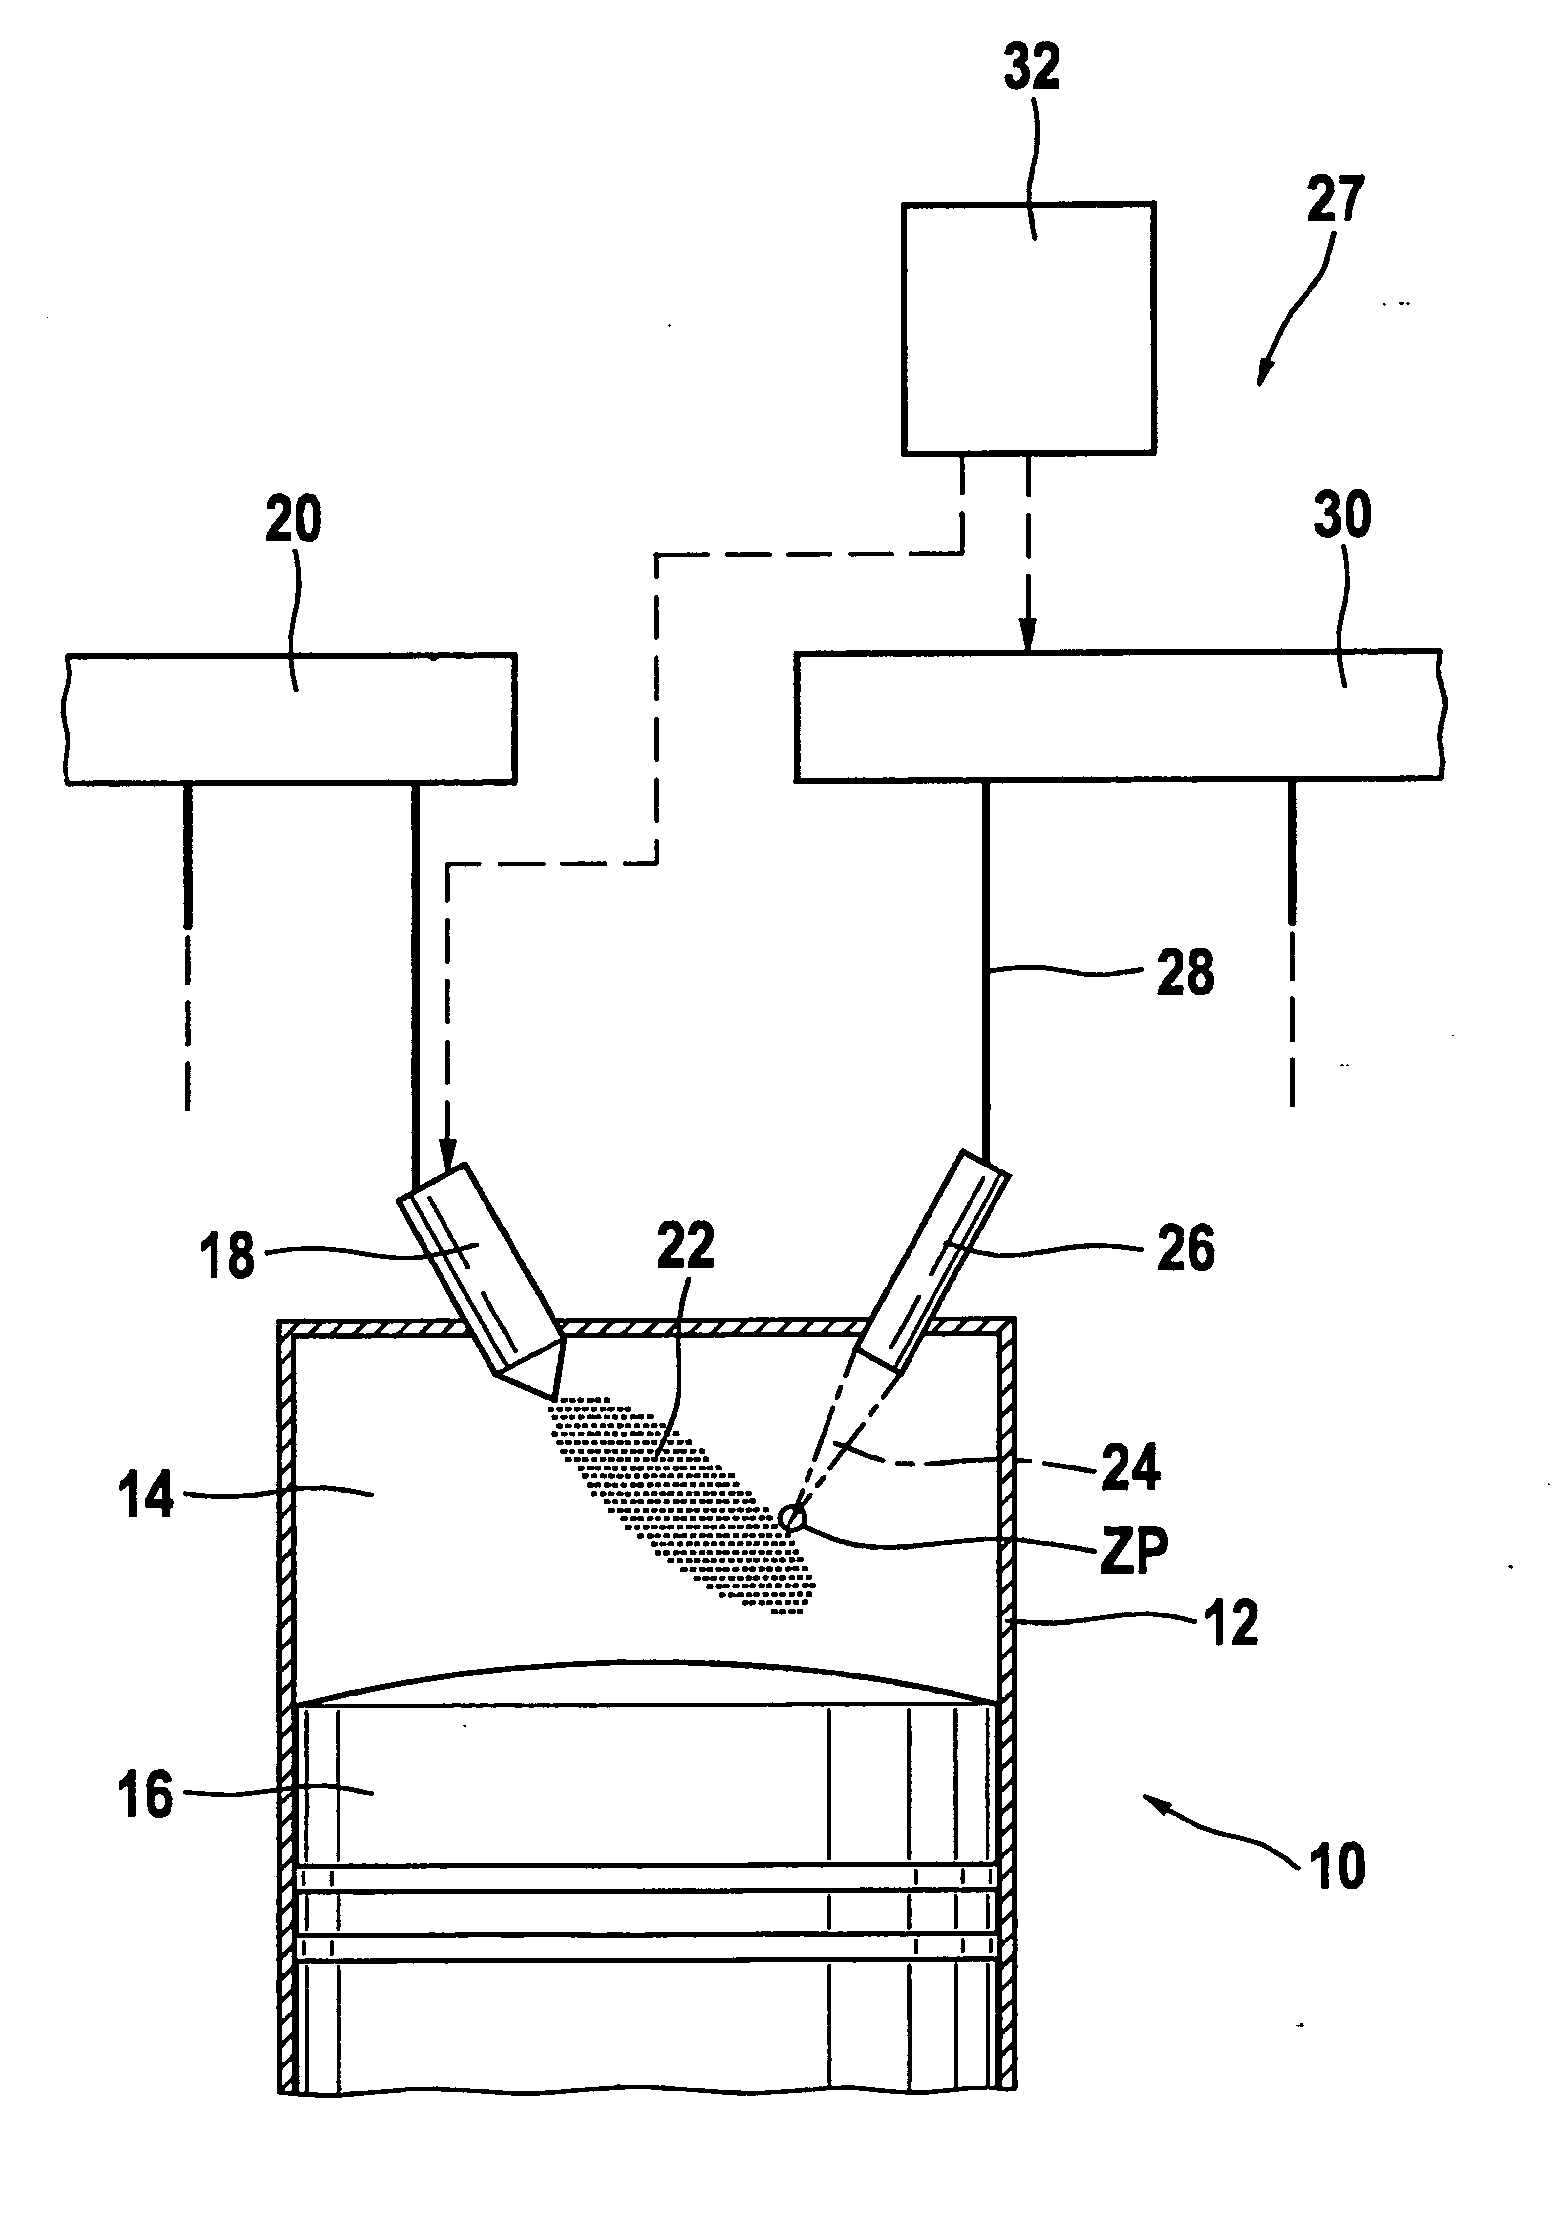 Ignition device for a laser ignition of an internal combustion engine